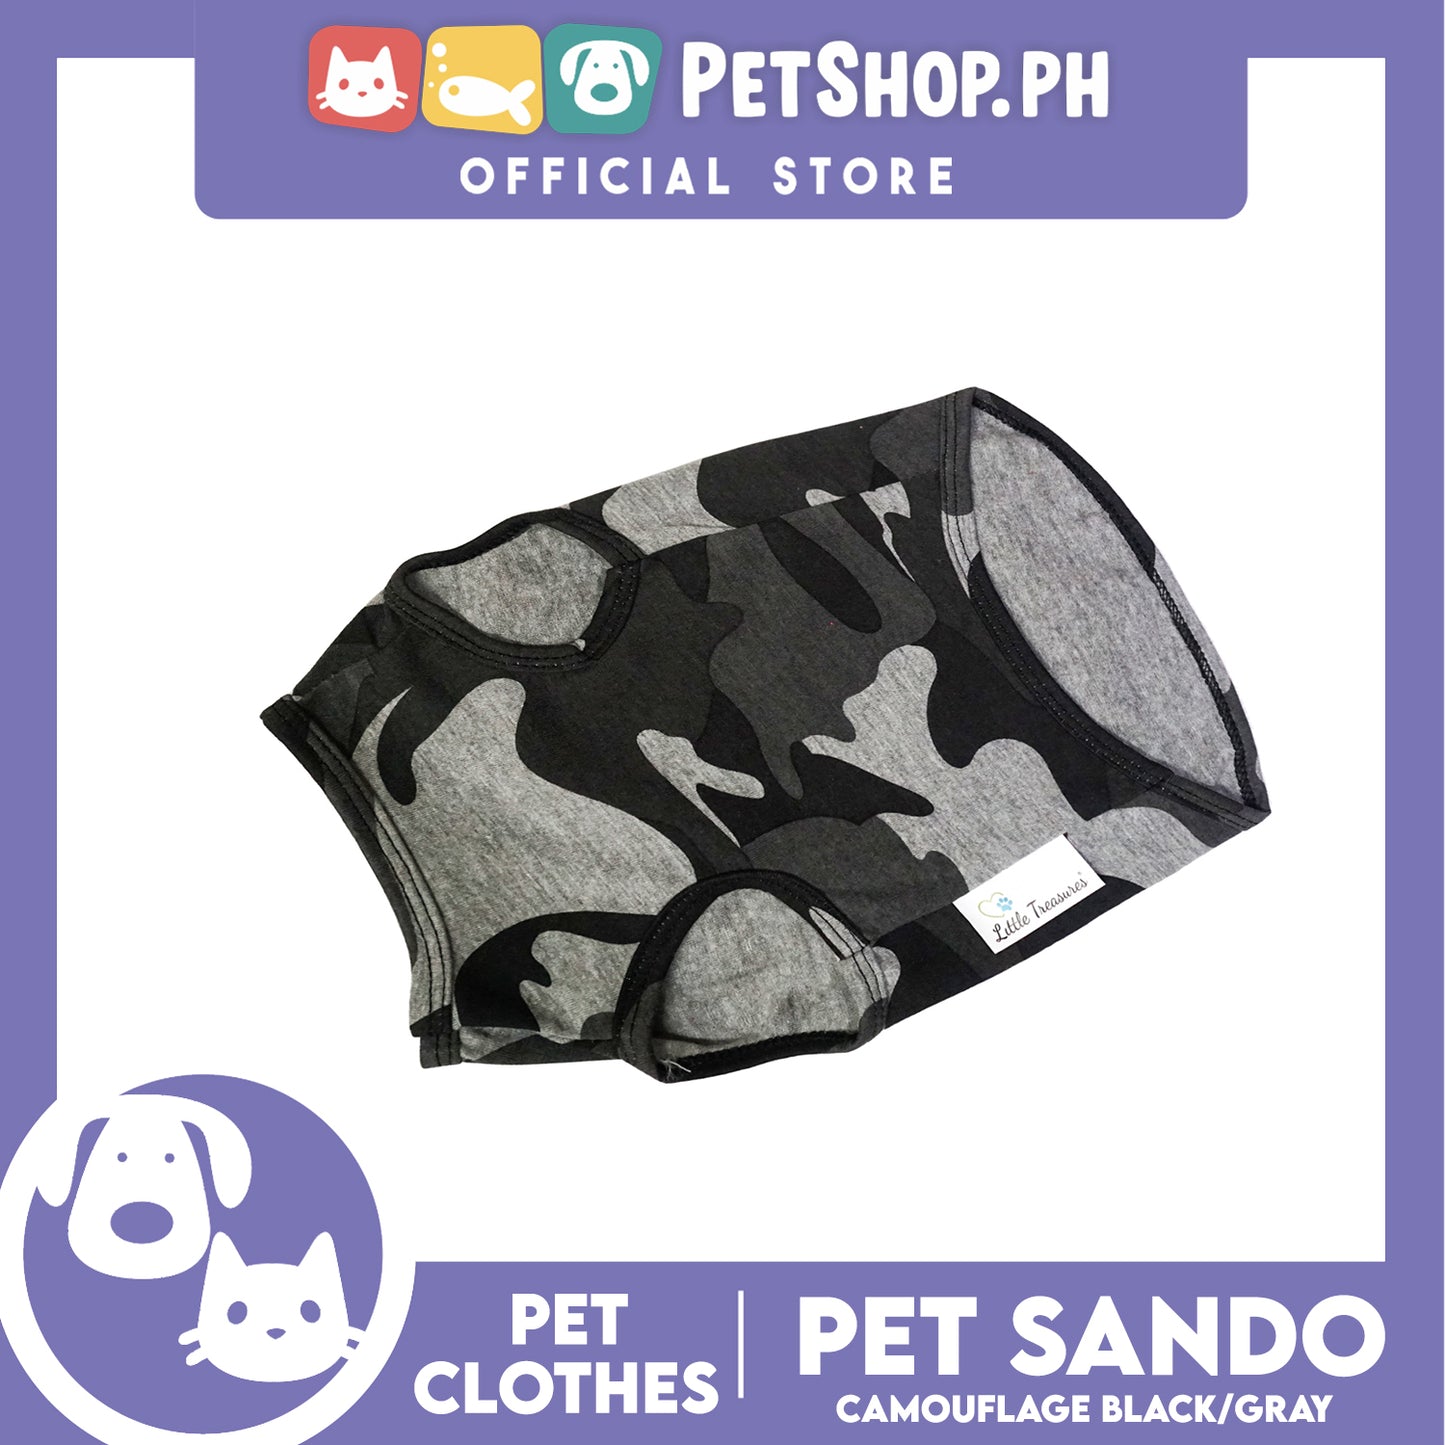 Pet Sando Camouflage Black/Gray (Extra Large) Pet Shirt Clothes Dress Perfect fit for Dogs